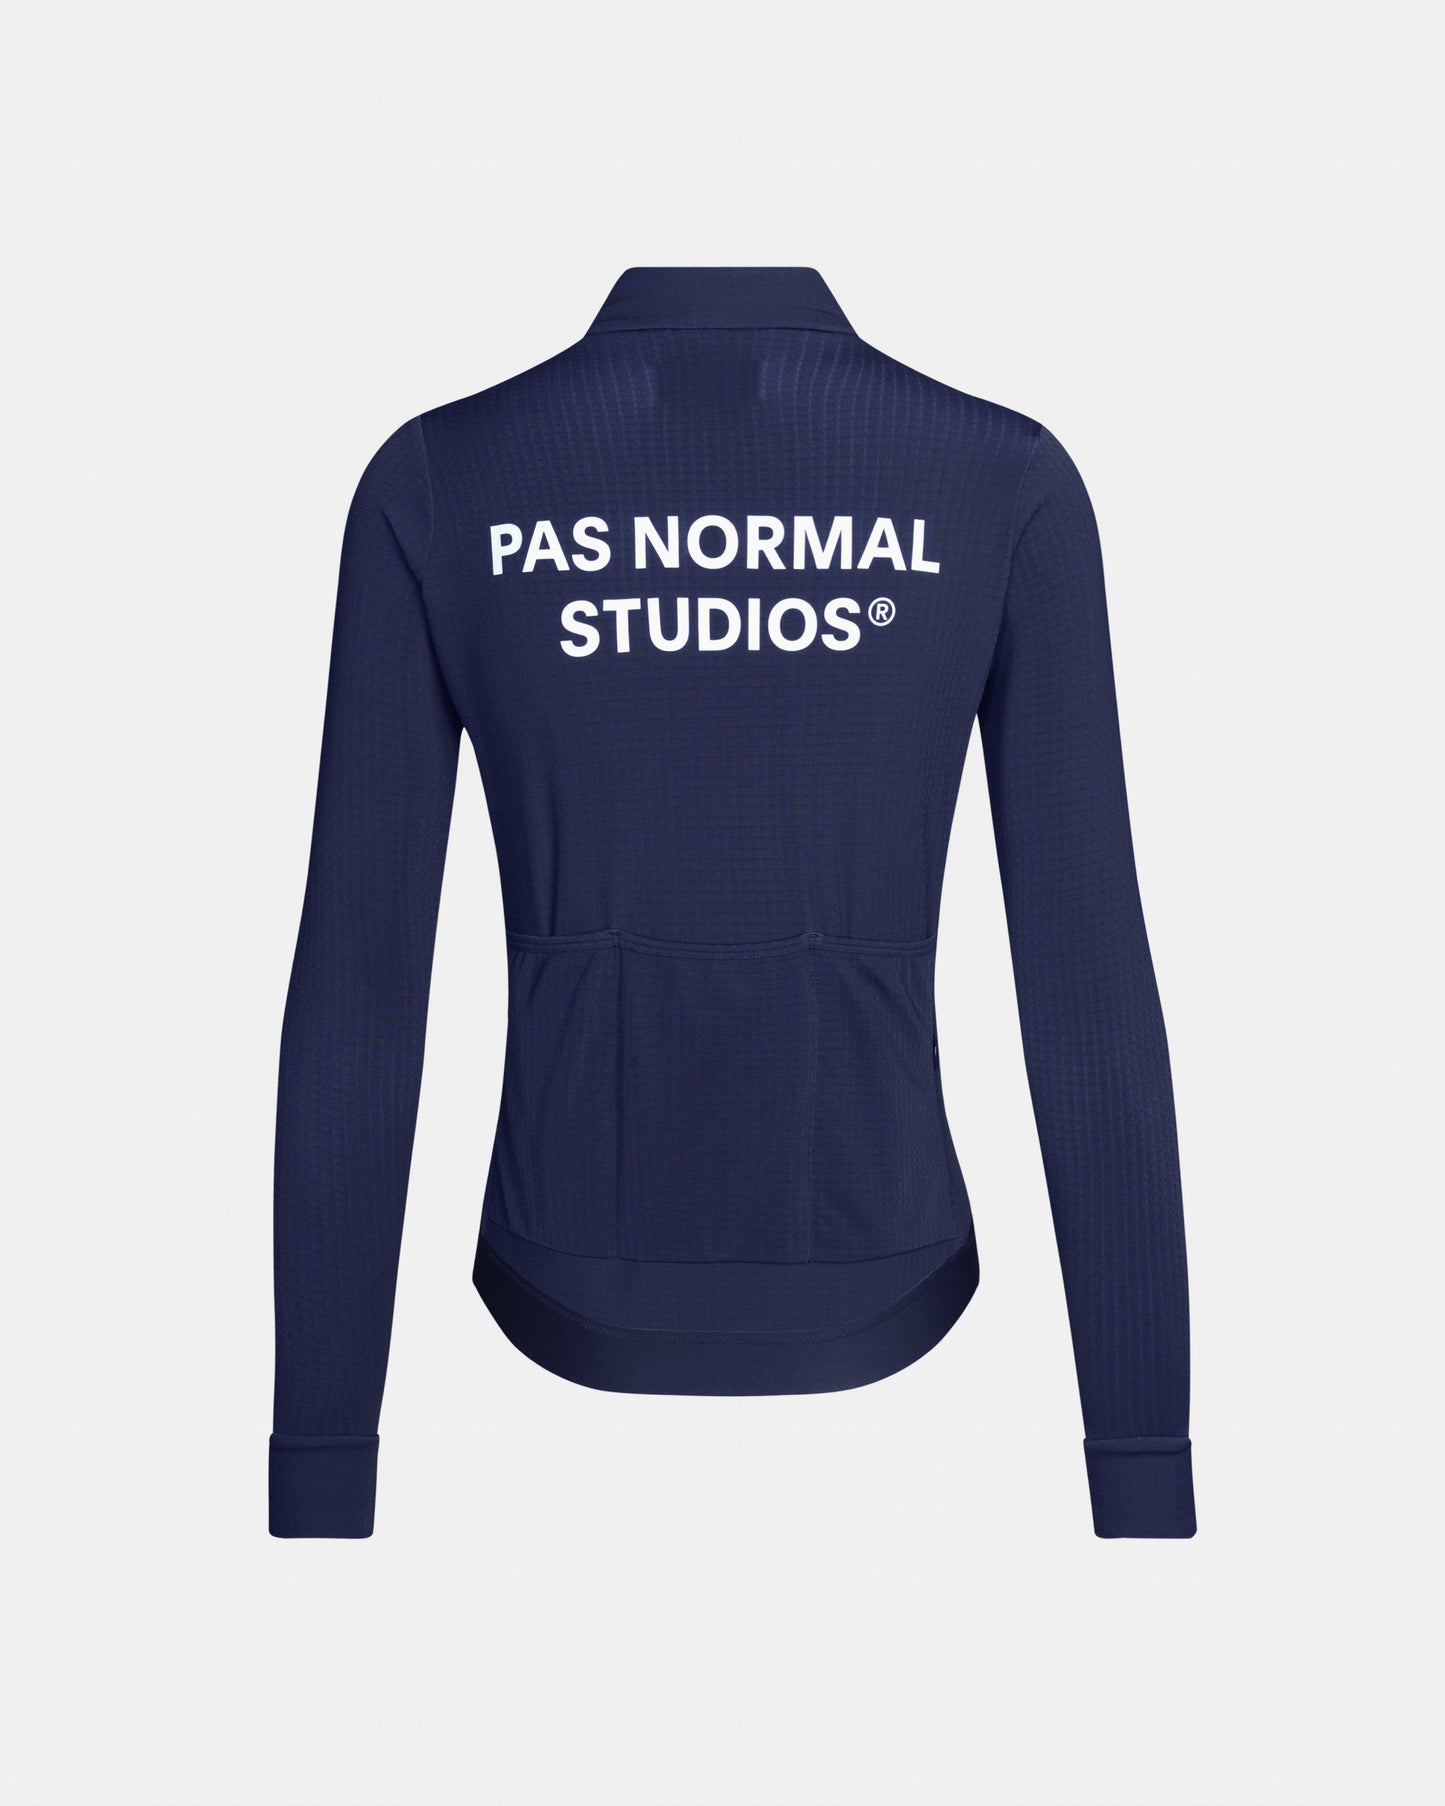 Pas Normal Studios W's Essential Long Sleeve Jersey